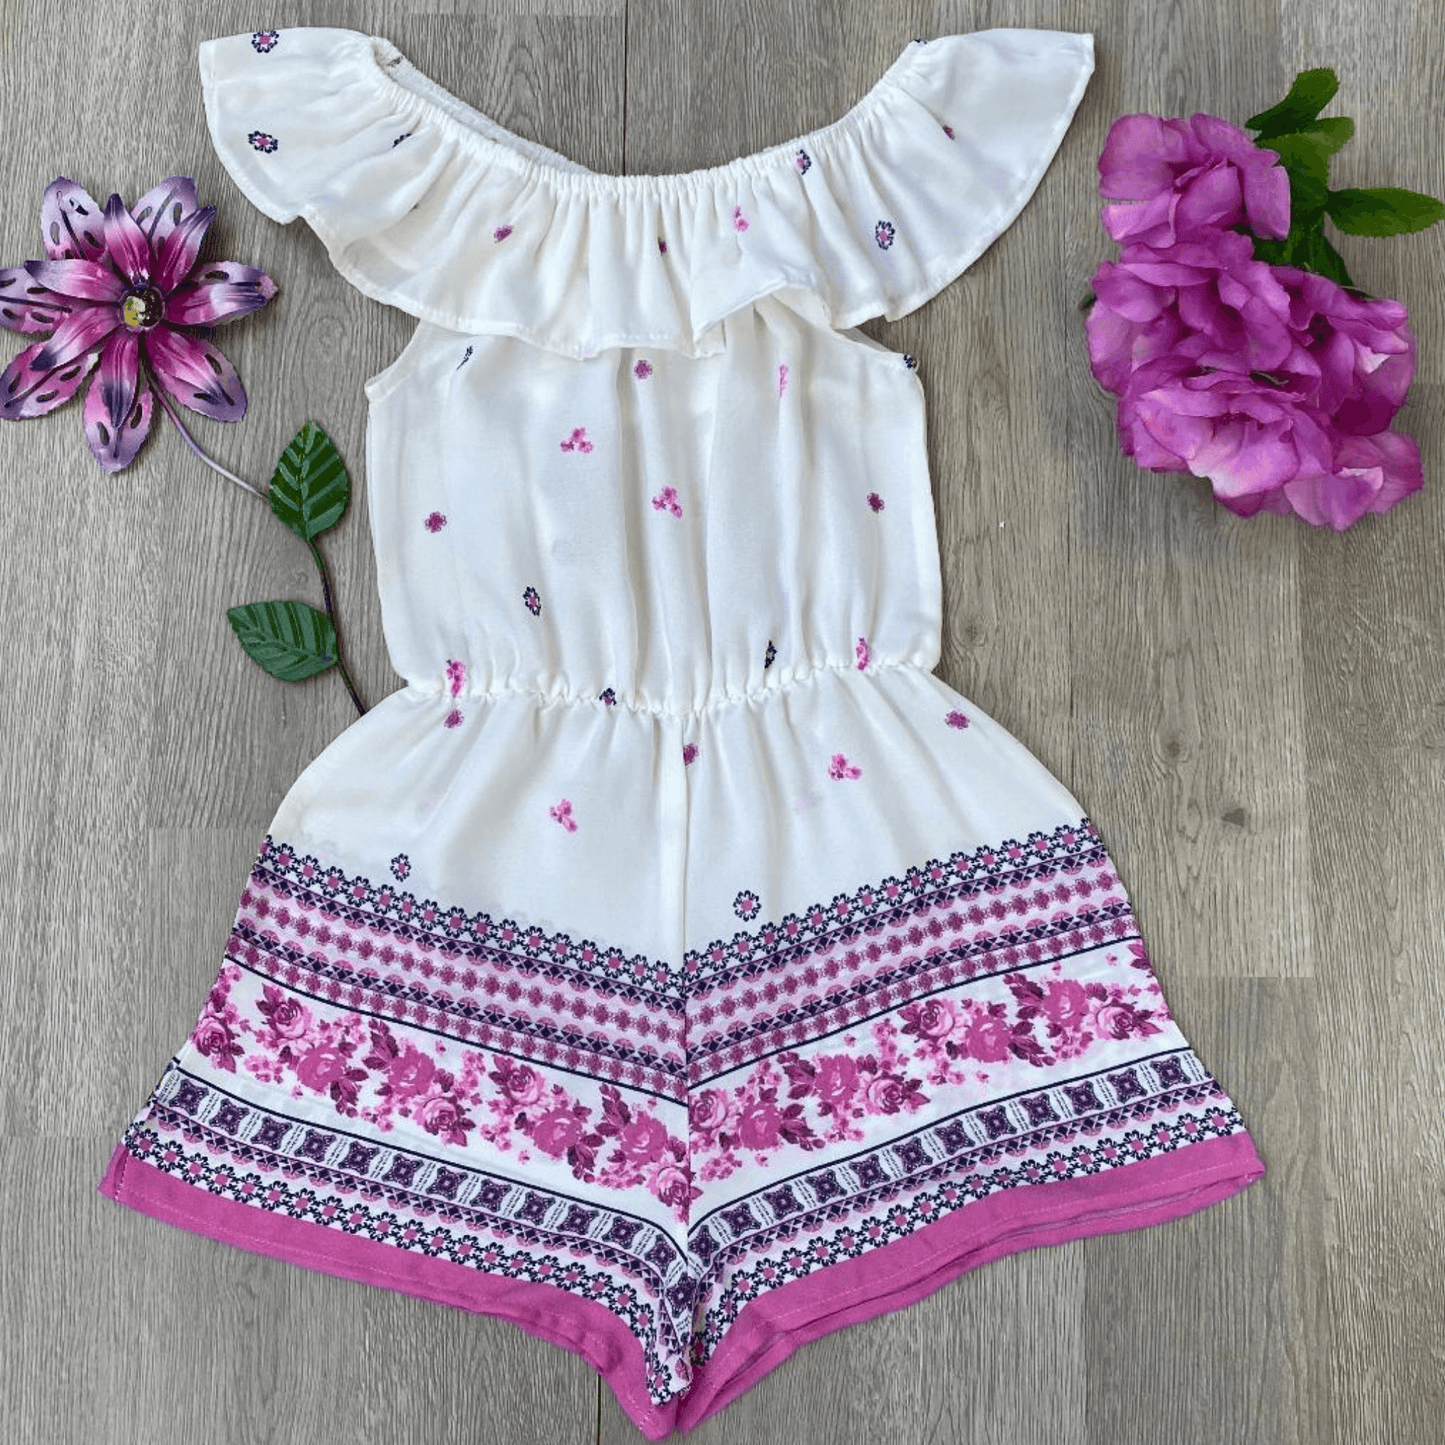 This romper is perfect for a hot, summer day.  With this light weight, white, ruffled peasant neck romper in woven Moroccan crepe with pink border your fashionista will be the most stylish girl around.